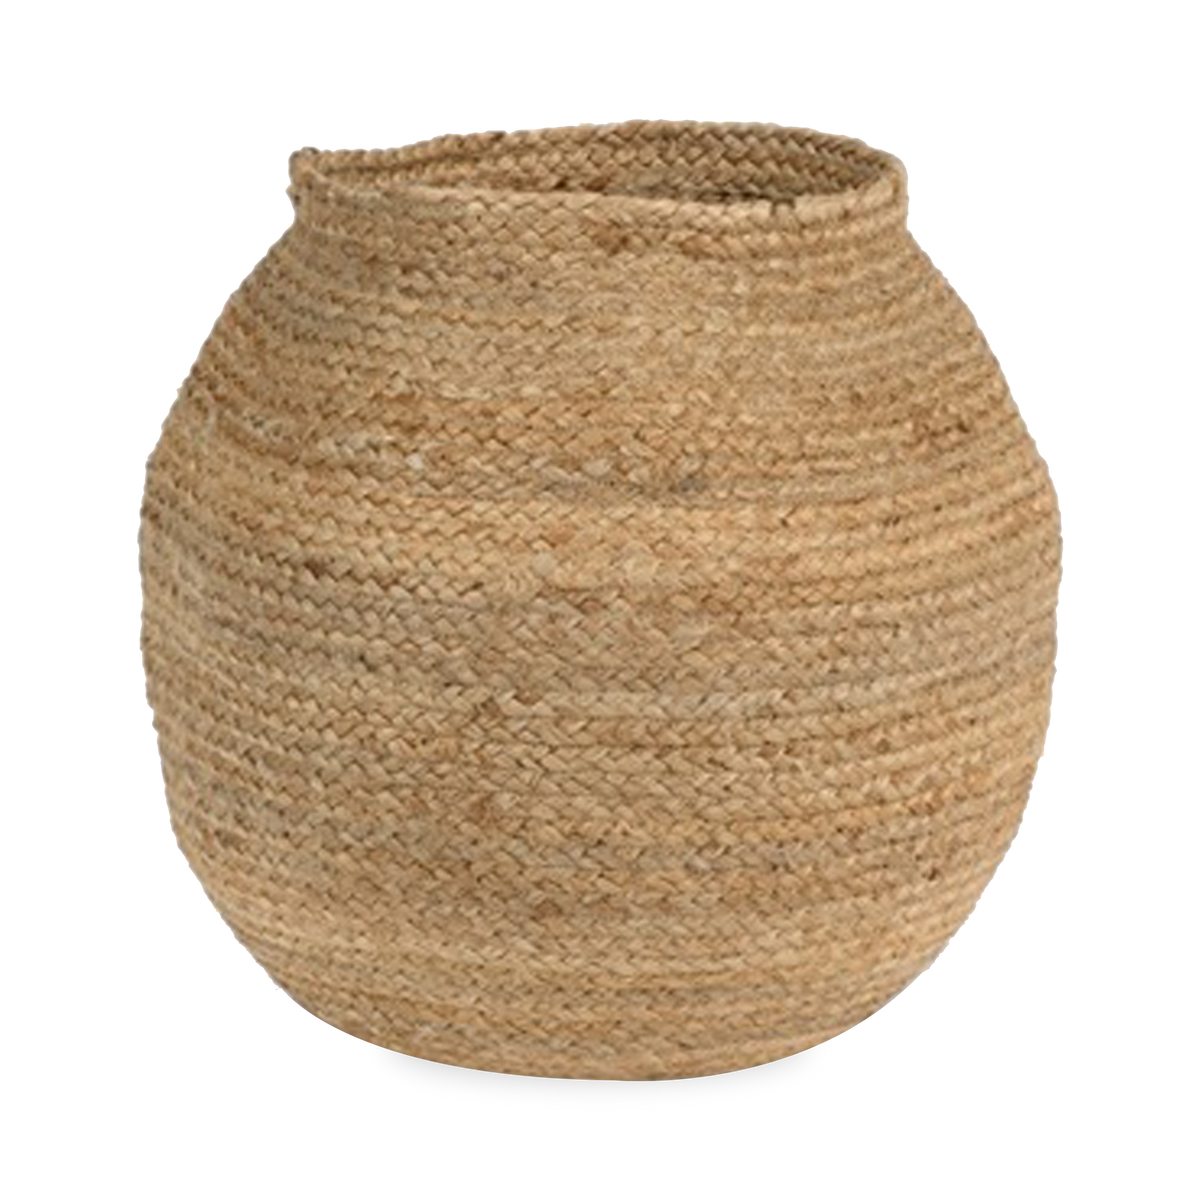 The natural composition of this Jute Storage Basket adds a rustic charm to your home.